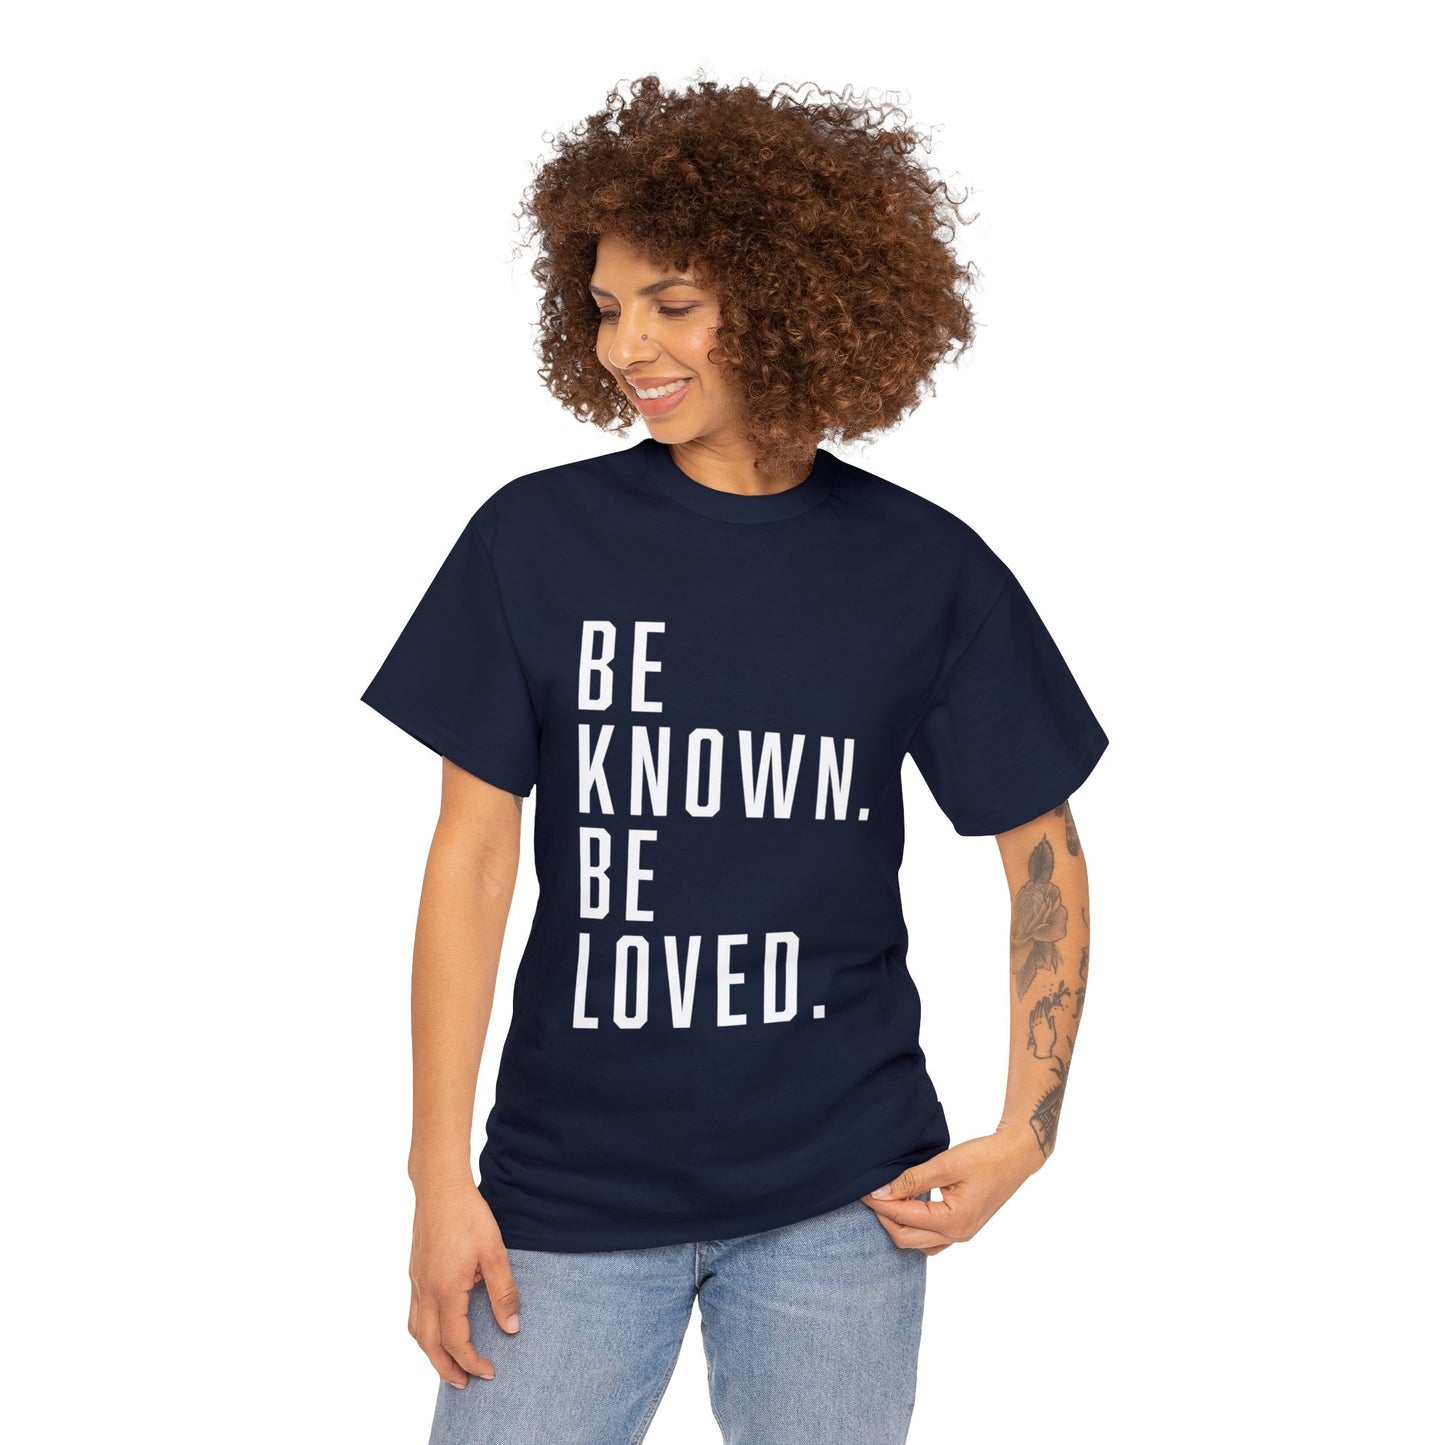 Be Known. Be Loved. Tee